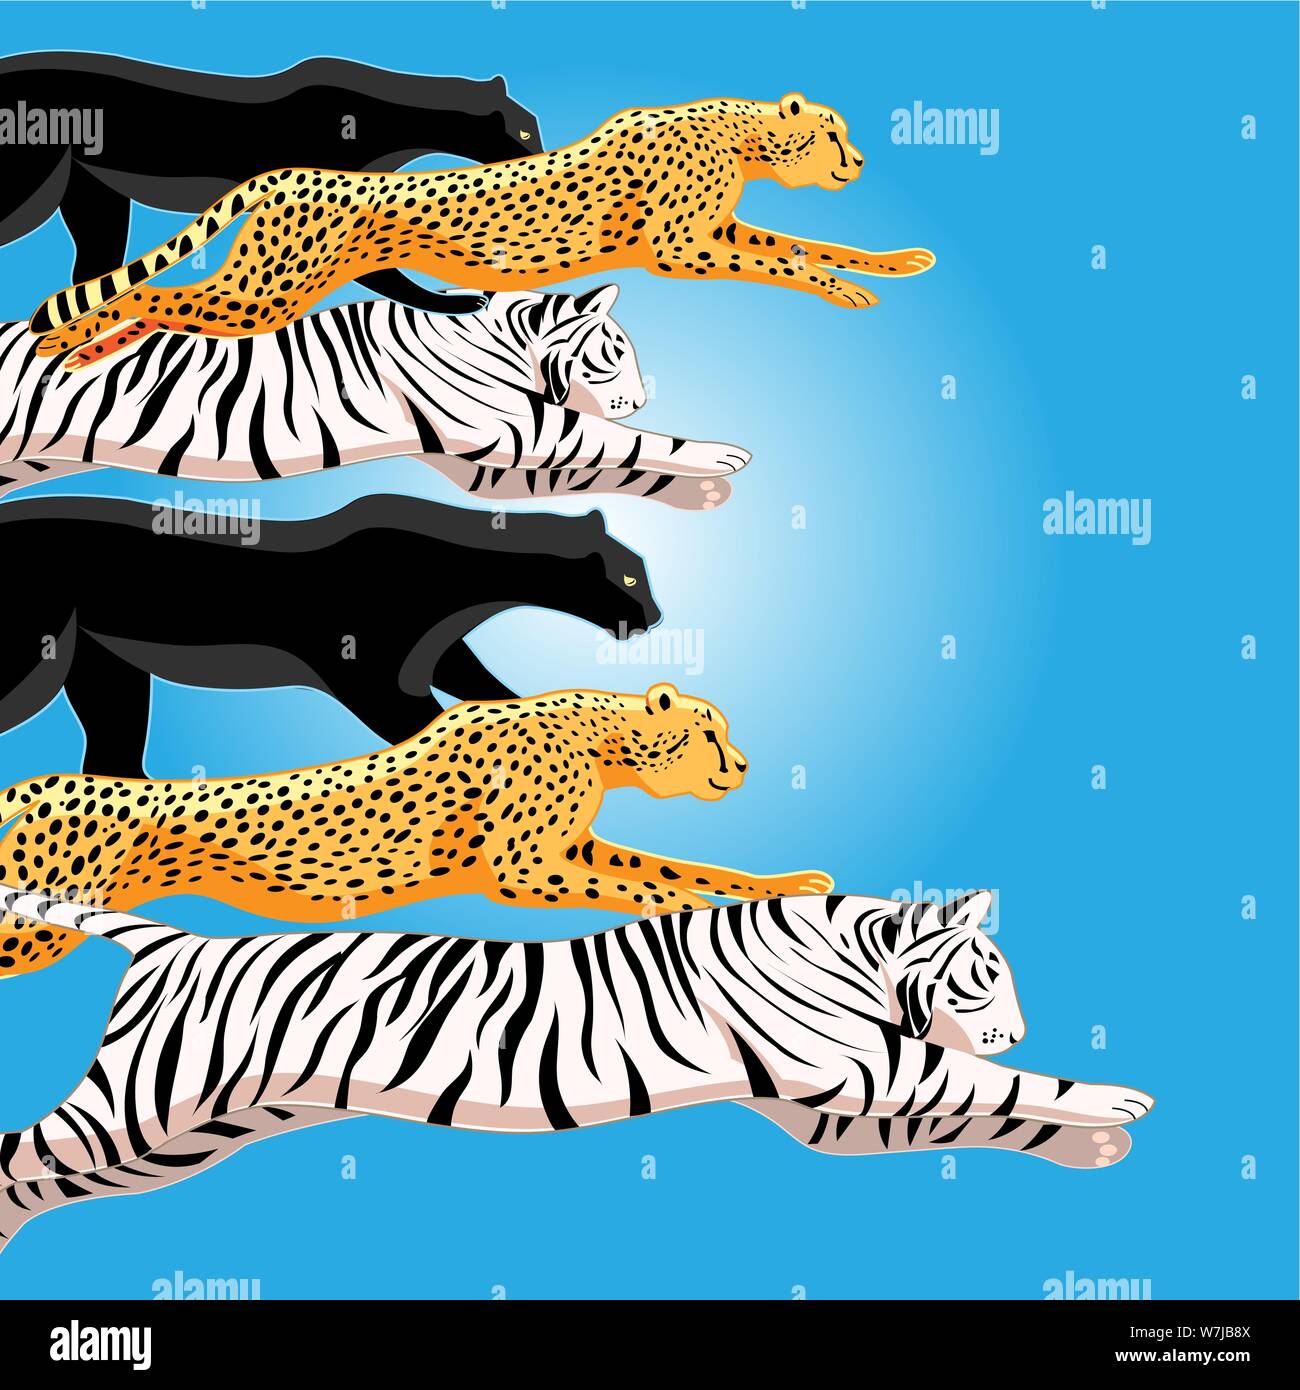 llustration jungle pattern of a Vector Stock page panthers, and for with a An poster or sun. web the example & Alamy on tigers leopards - Image background Art